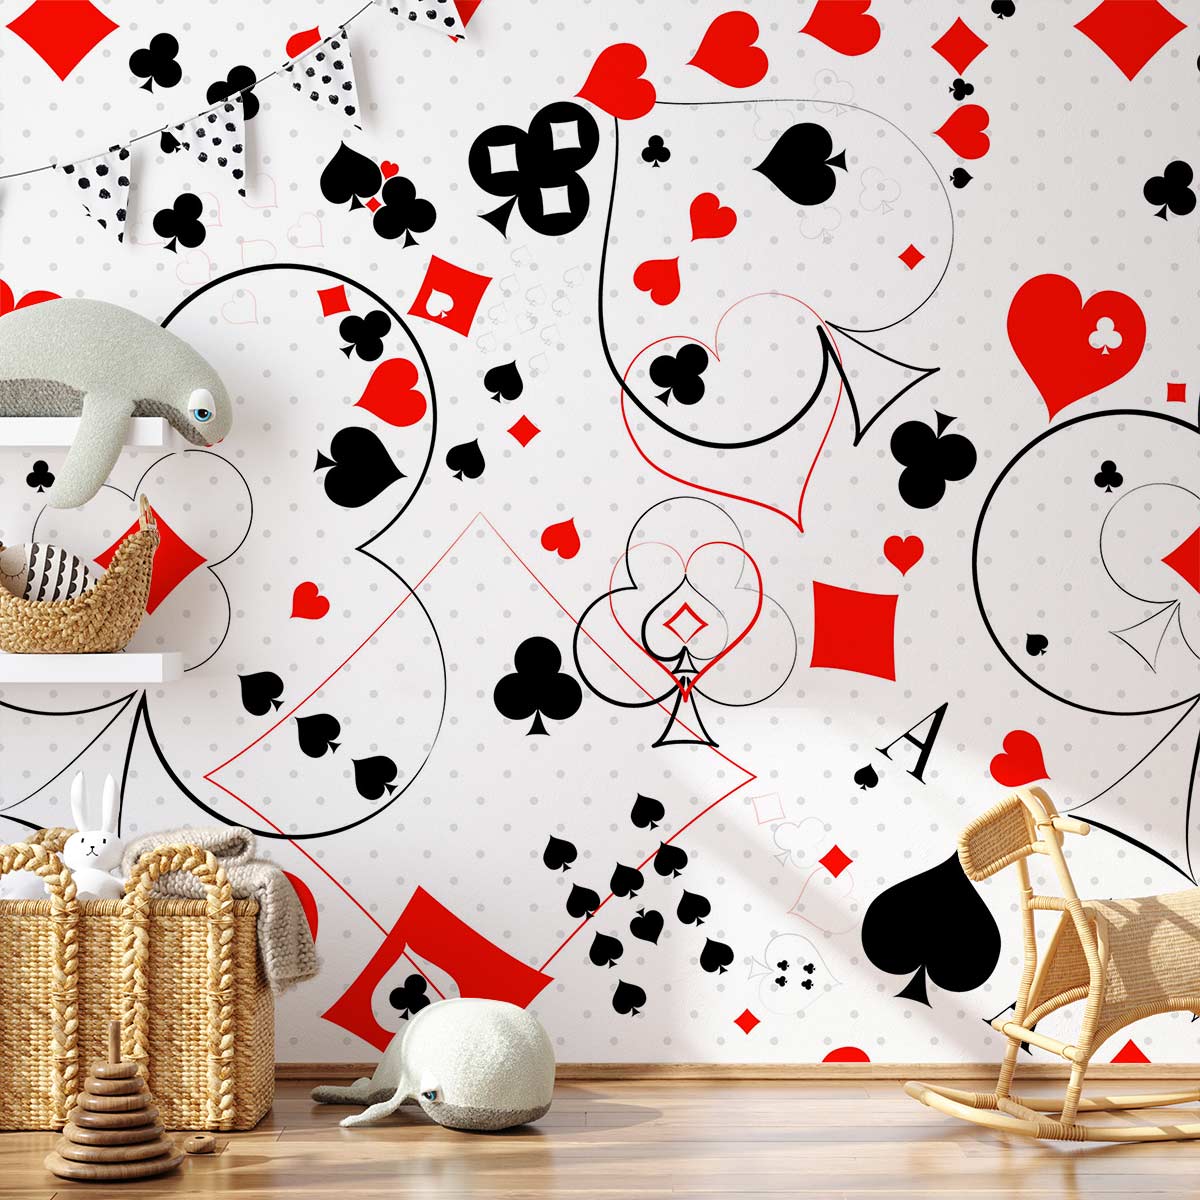 Rare wallpaper with a poker design in red and black.